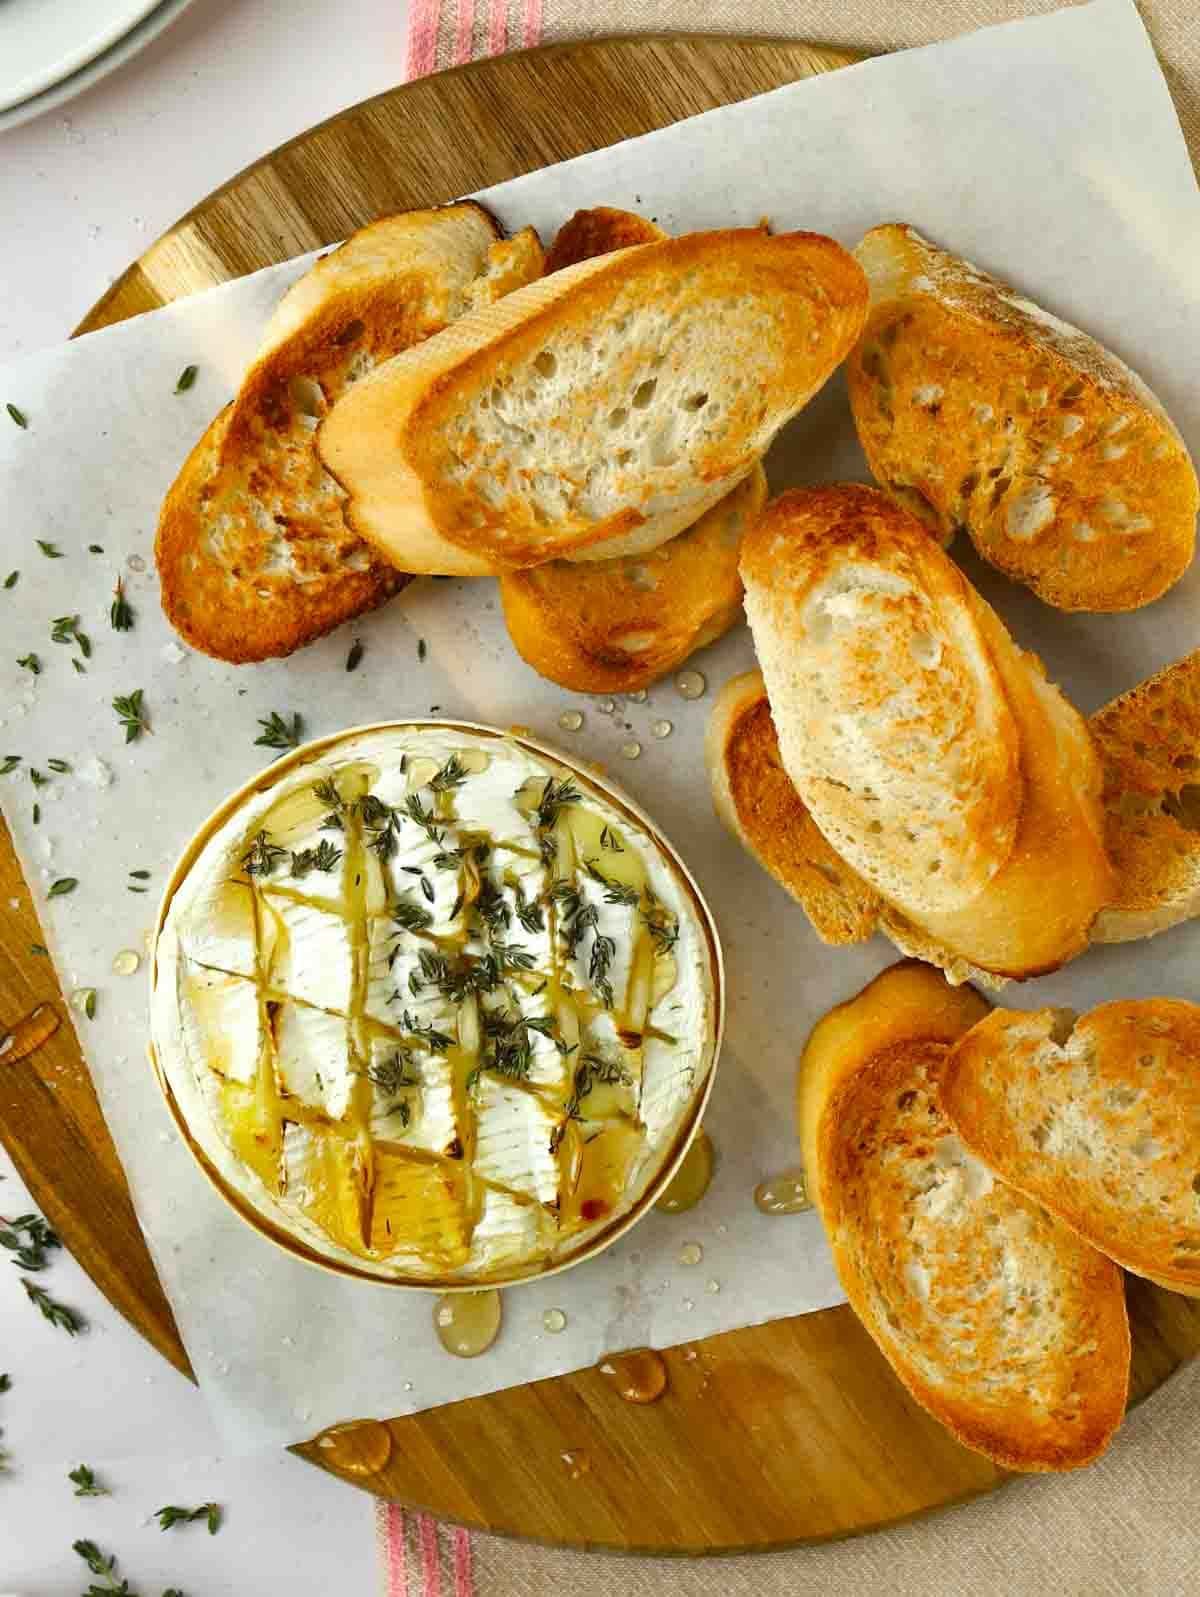 A round wooden board with sliced, toasted French bread on top with a round of baked camembert cheese.